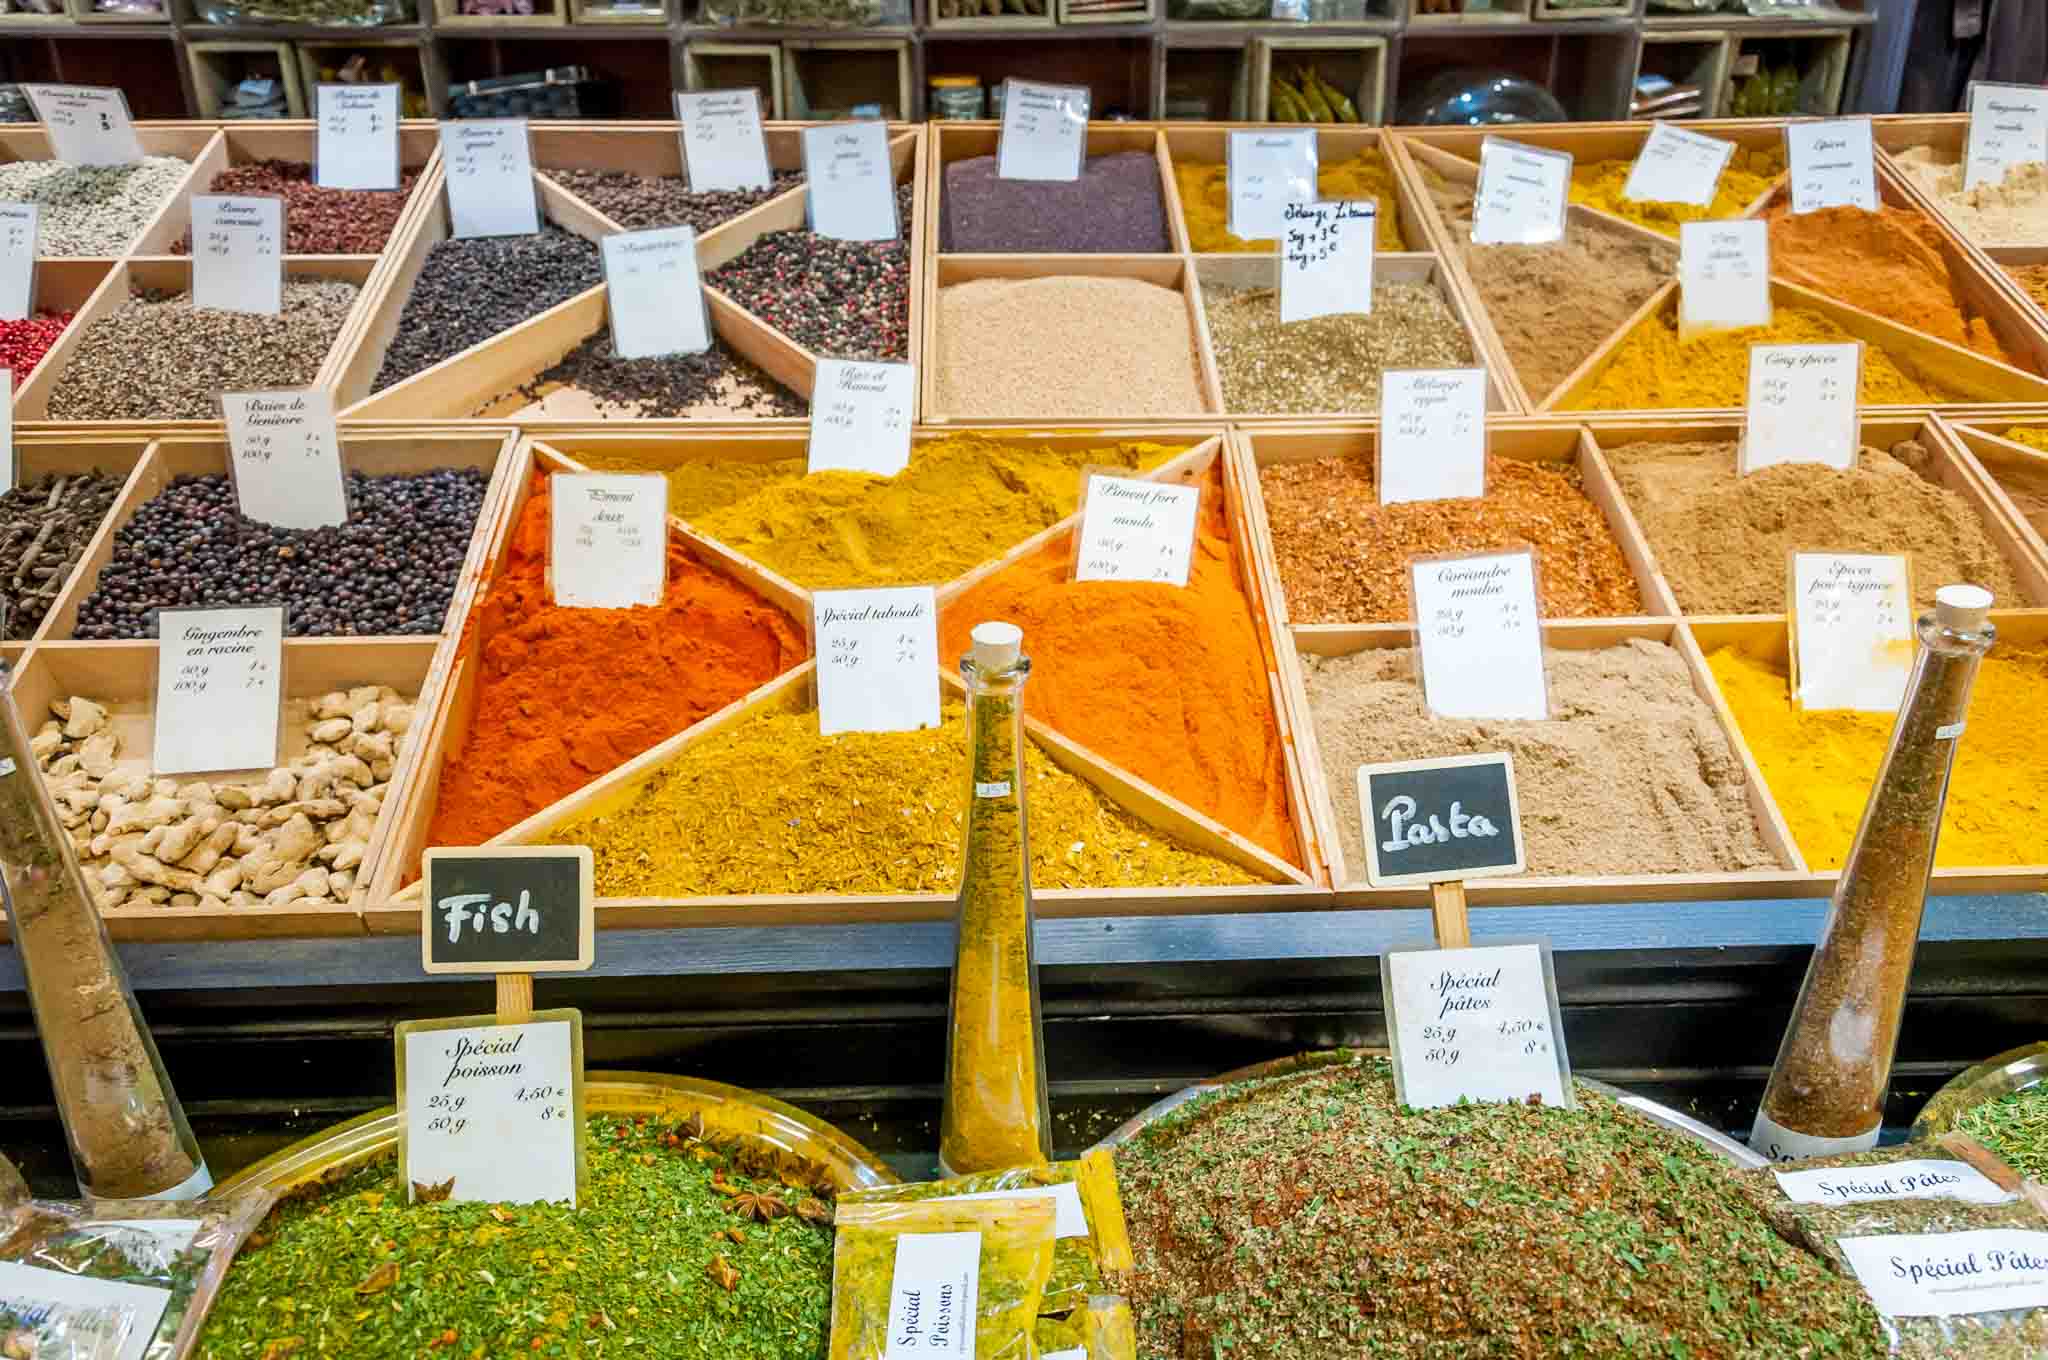 Spices for sale at the Les Halles market.